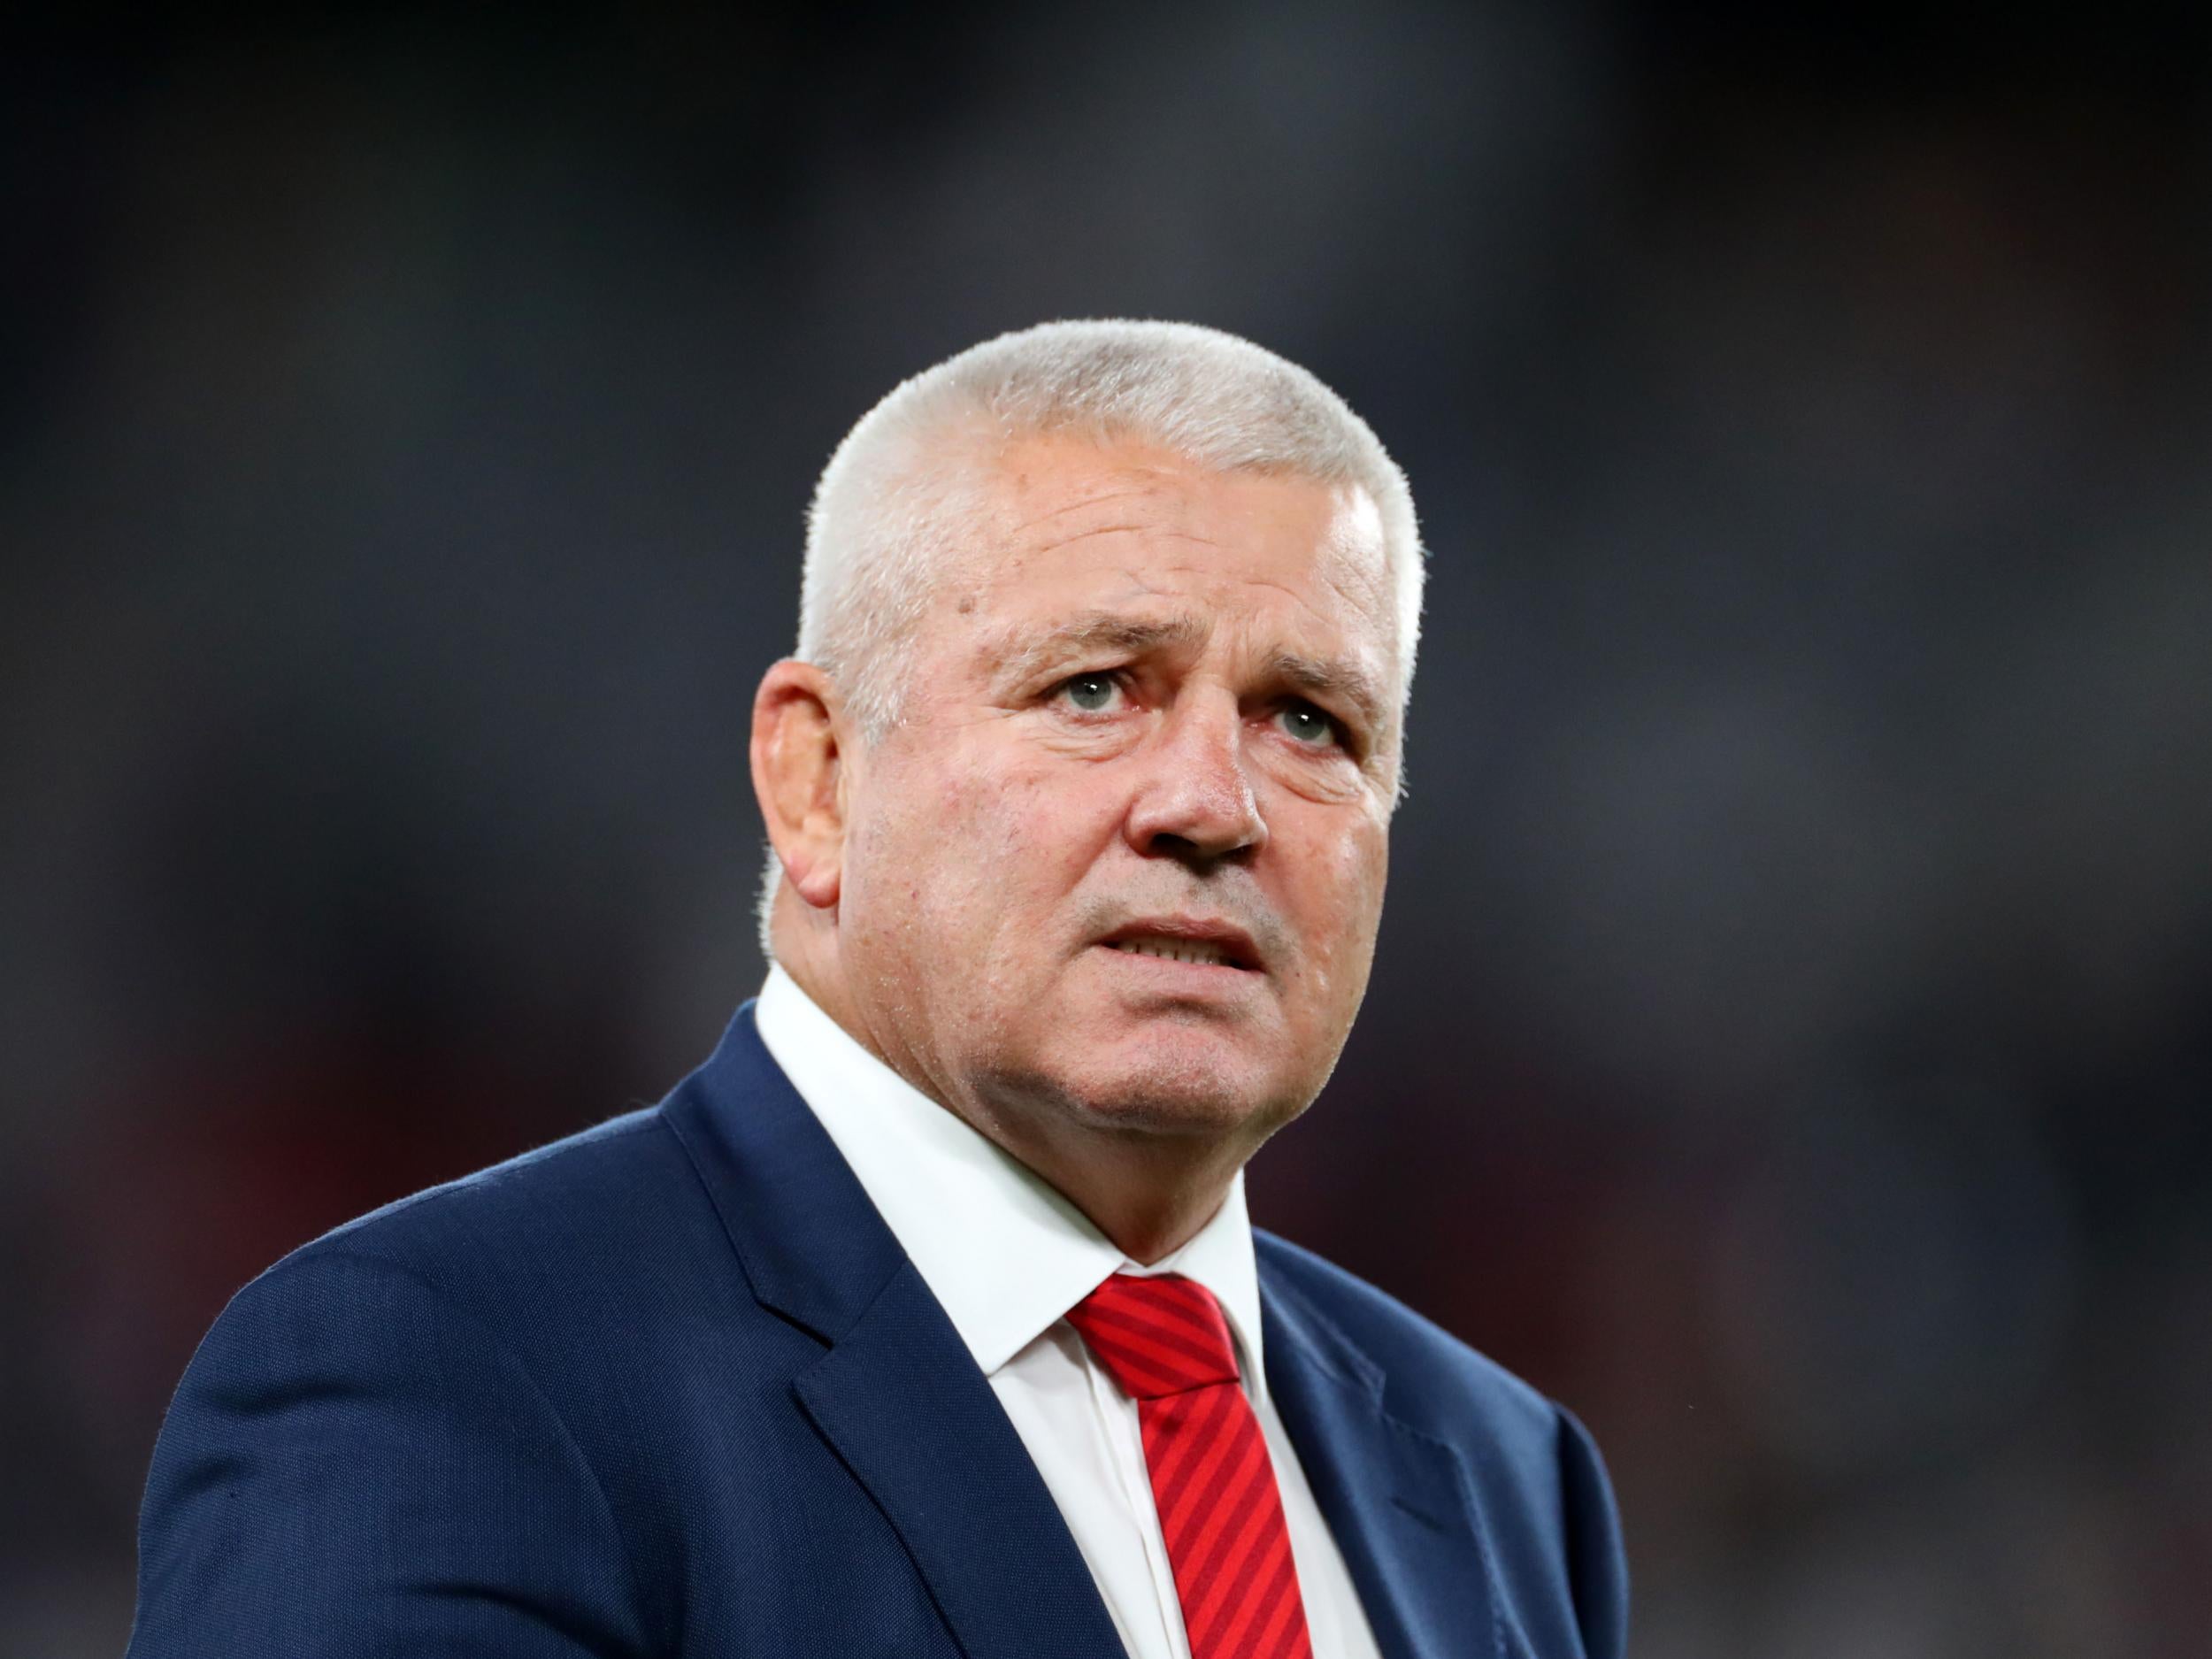 Gatland will lead the Lions for the third time